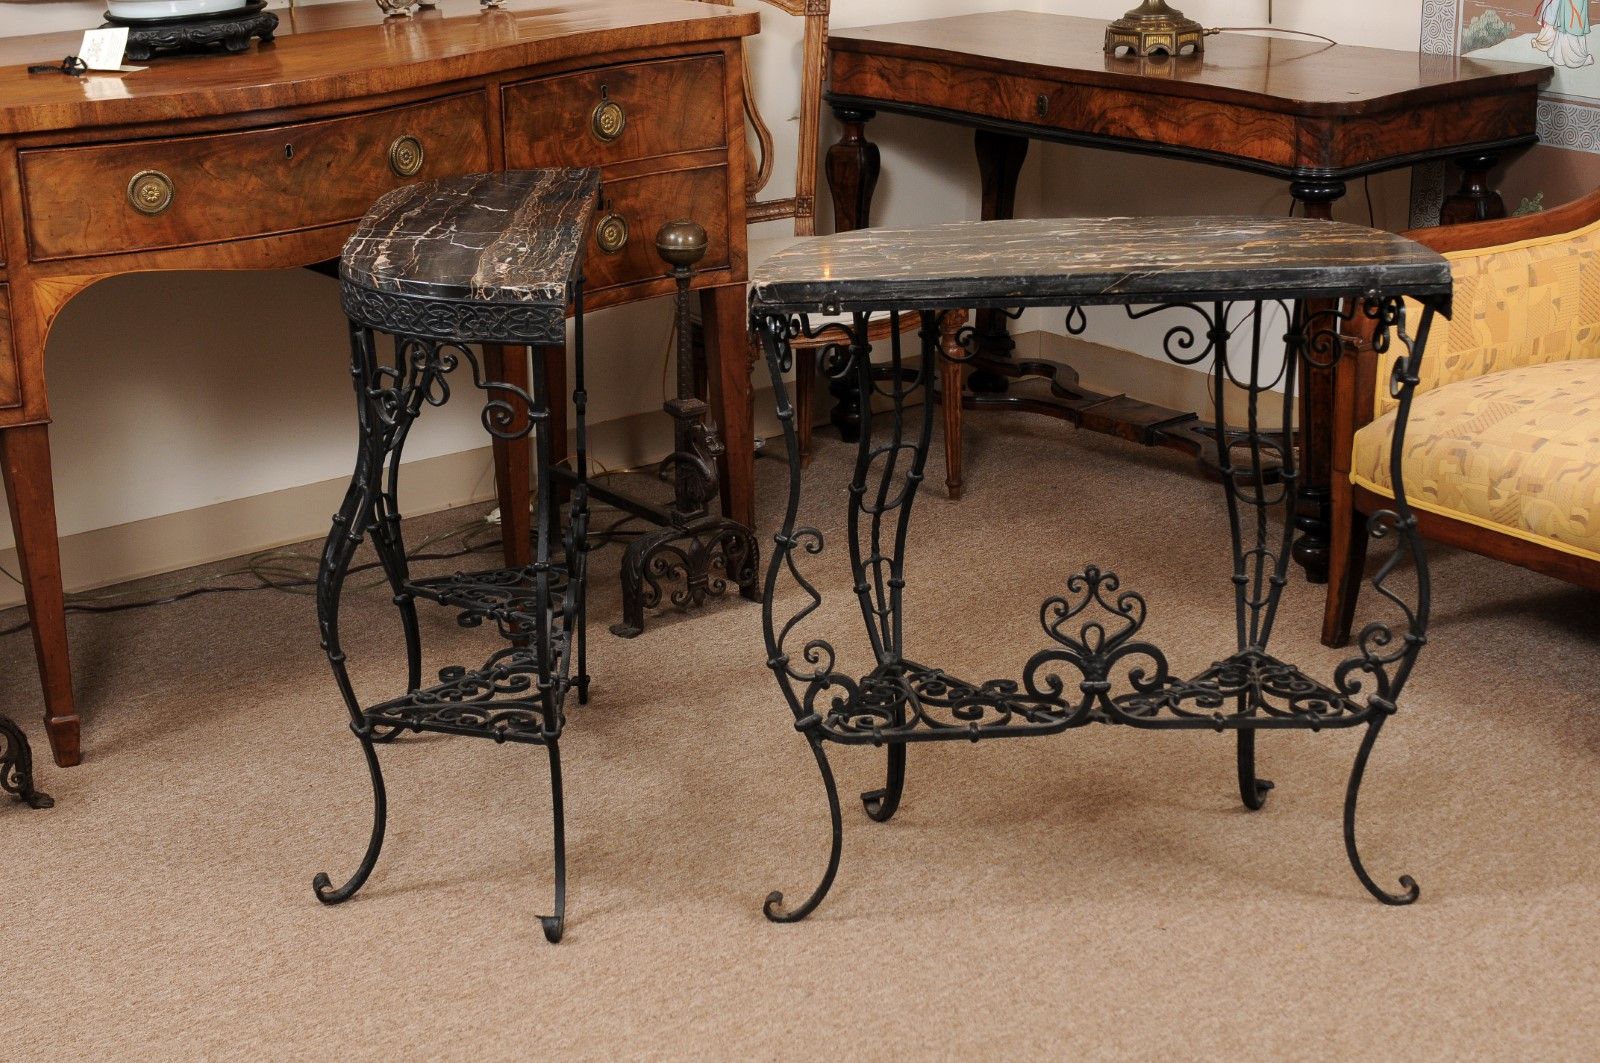 Pair Of Iron Console Tables With Cabriole Legs, Scroll Detail, & Black Throughout Aged Black Iron Console Tables (View 10 of 20)